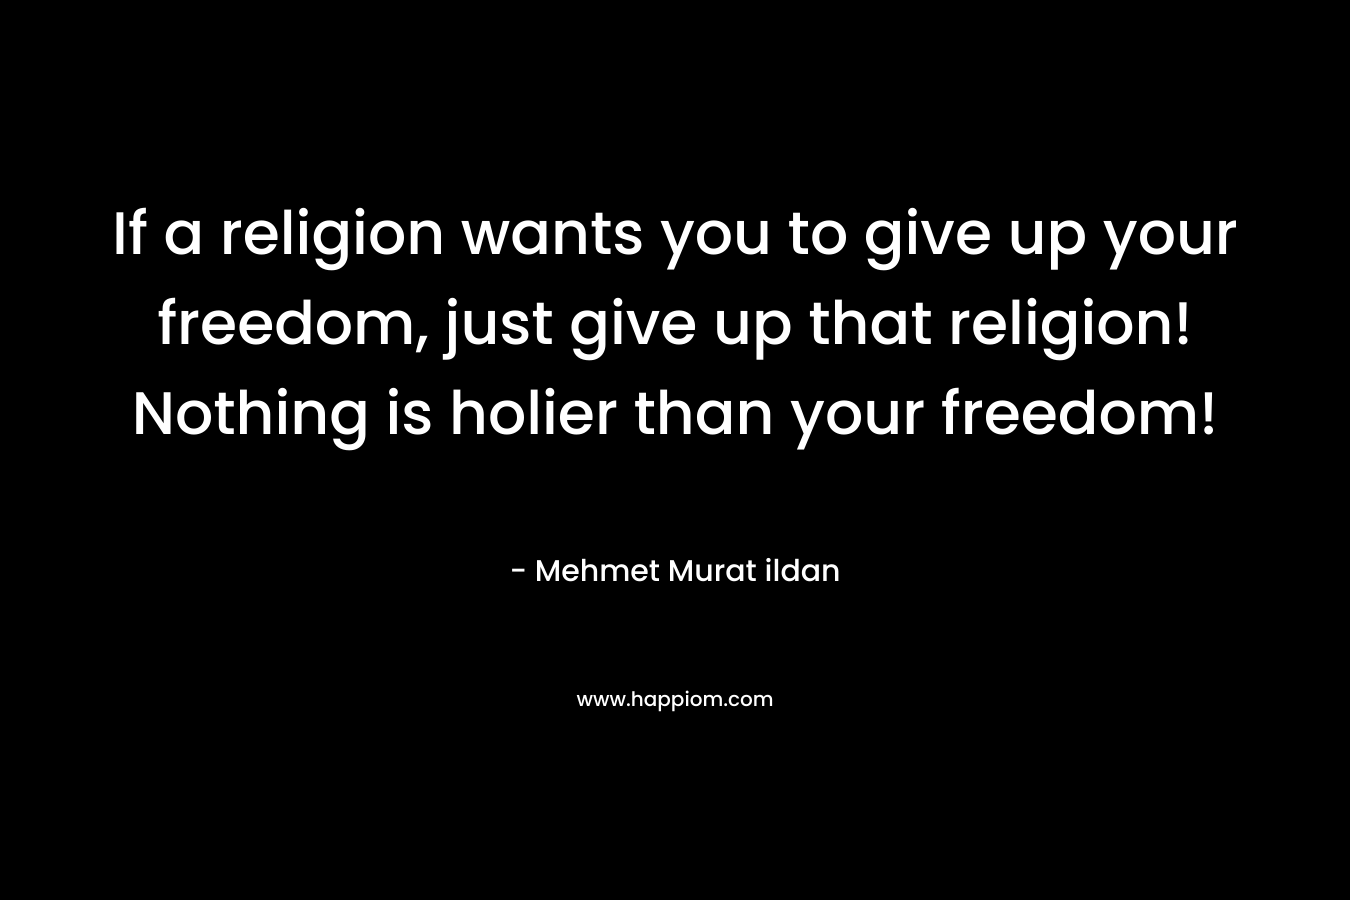 If a religion wants you to give up your freedom, just give up that religion! Nothing is holier than your freedom! – Mehmet Murat ildan